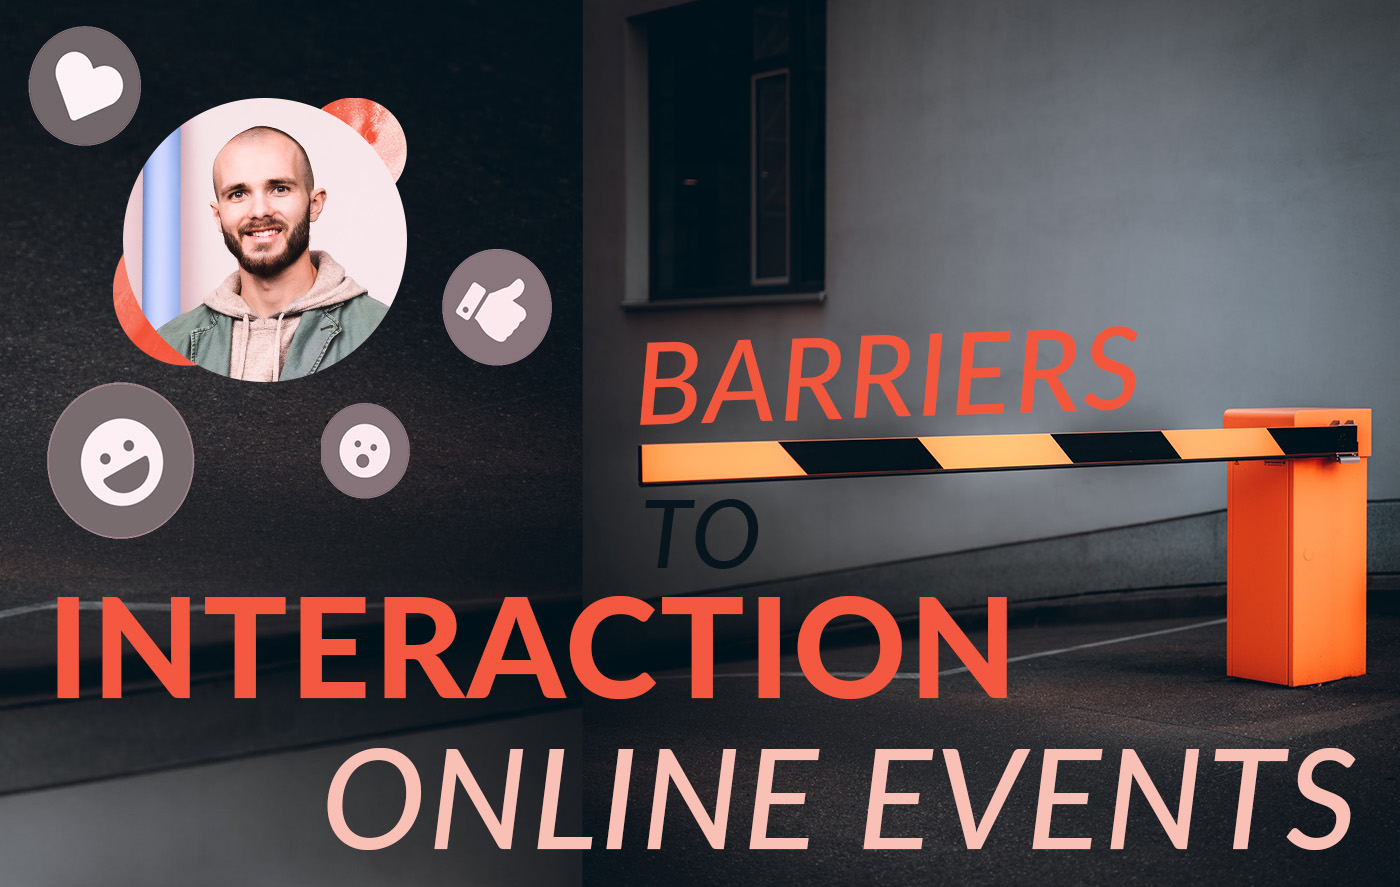 Are you struggling with engaging your webinar attendees? Here are 3 barriers that hinder interaction and how to avoid them.